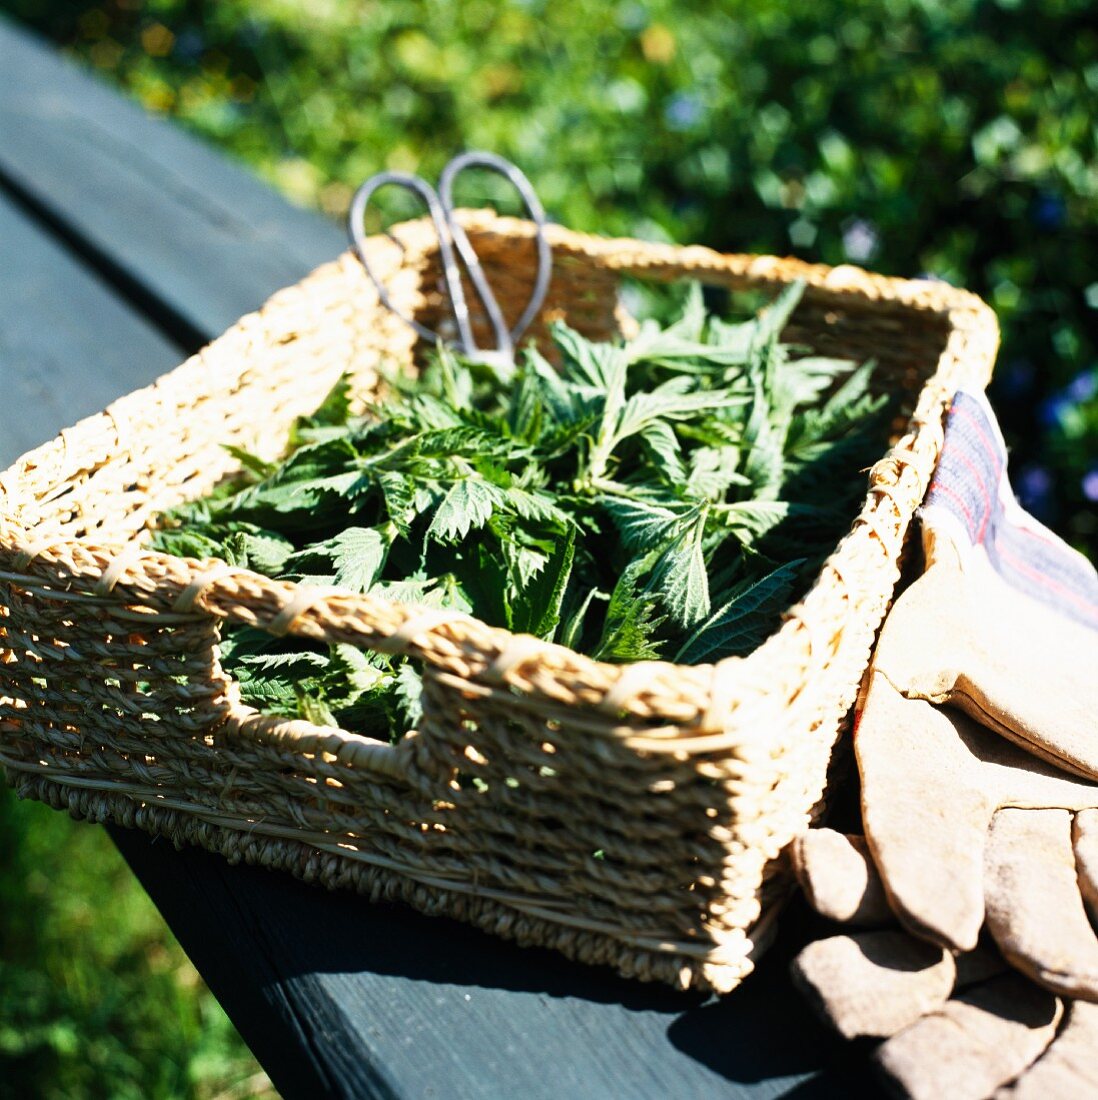 Nettles and herb scissors in a basket